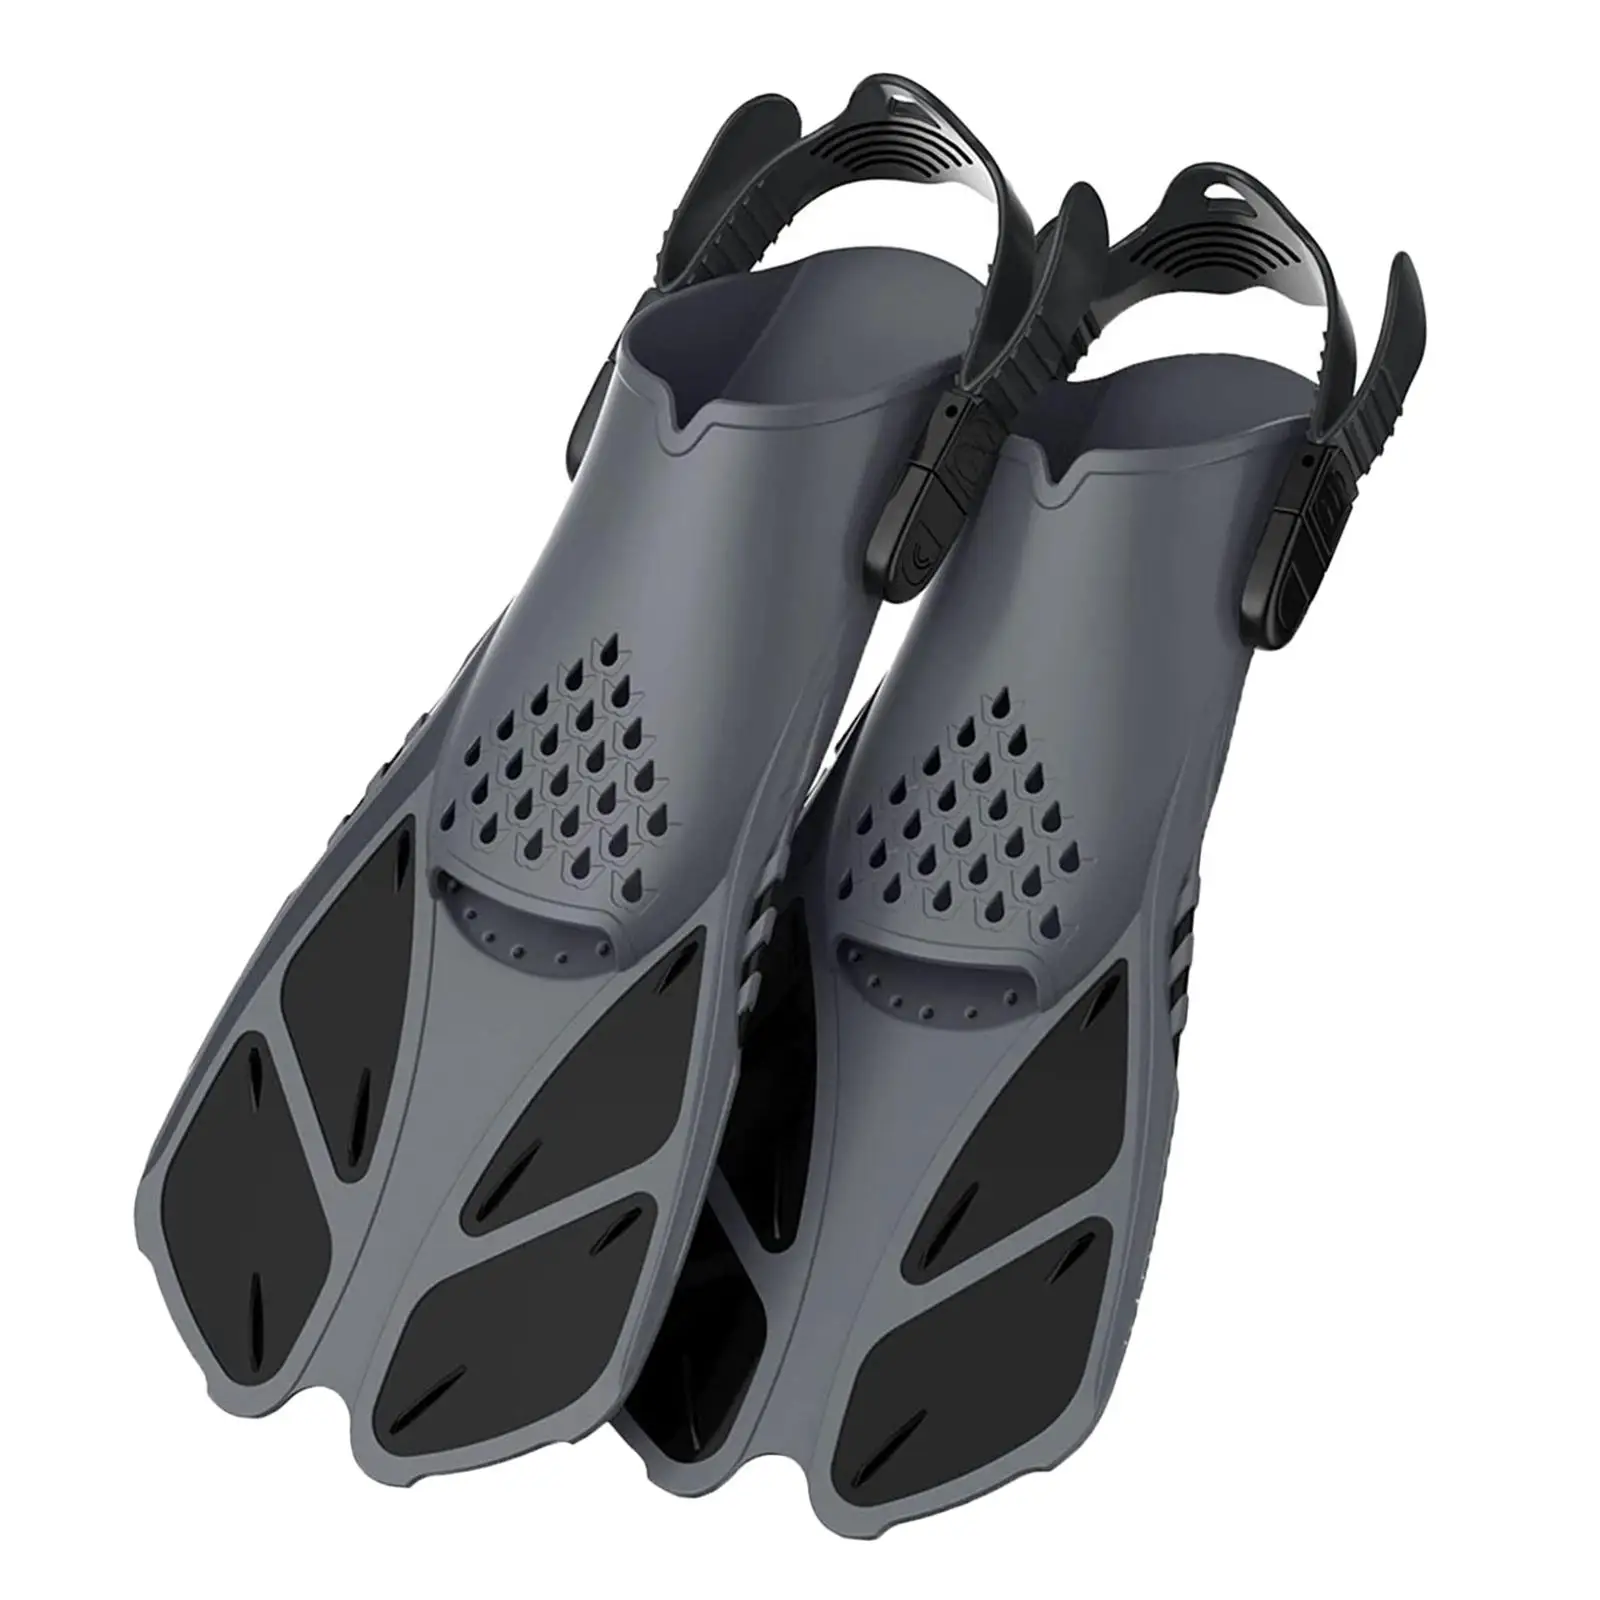 2Pcs Professional Swimming Flippers Feet Shoe for Water Sports, Diving, Scuba